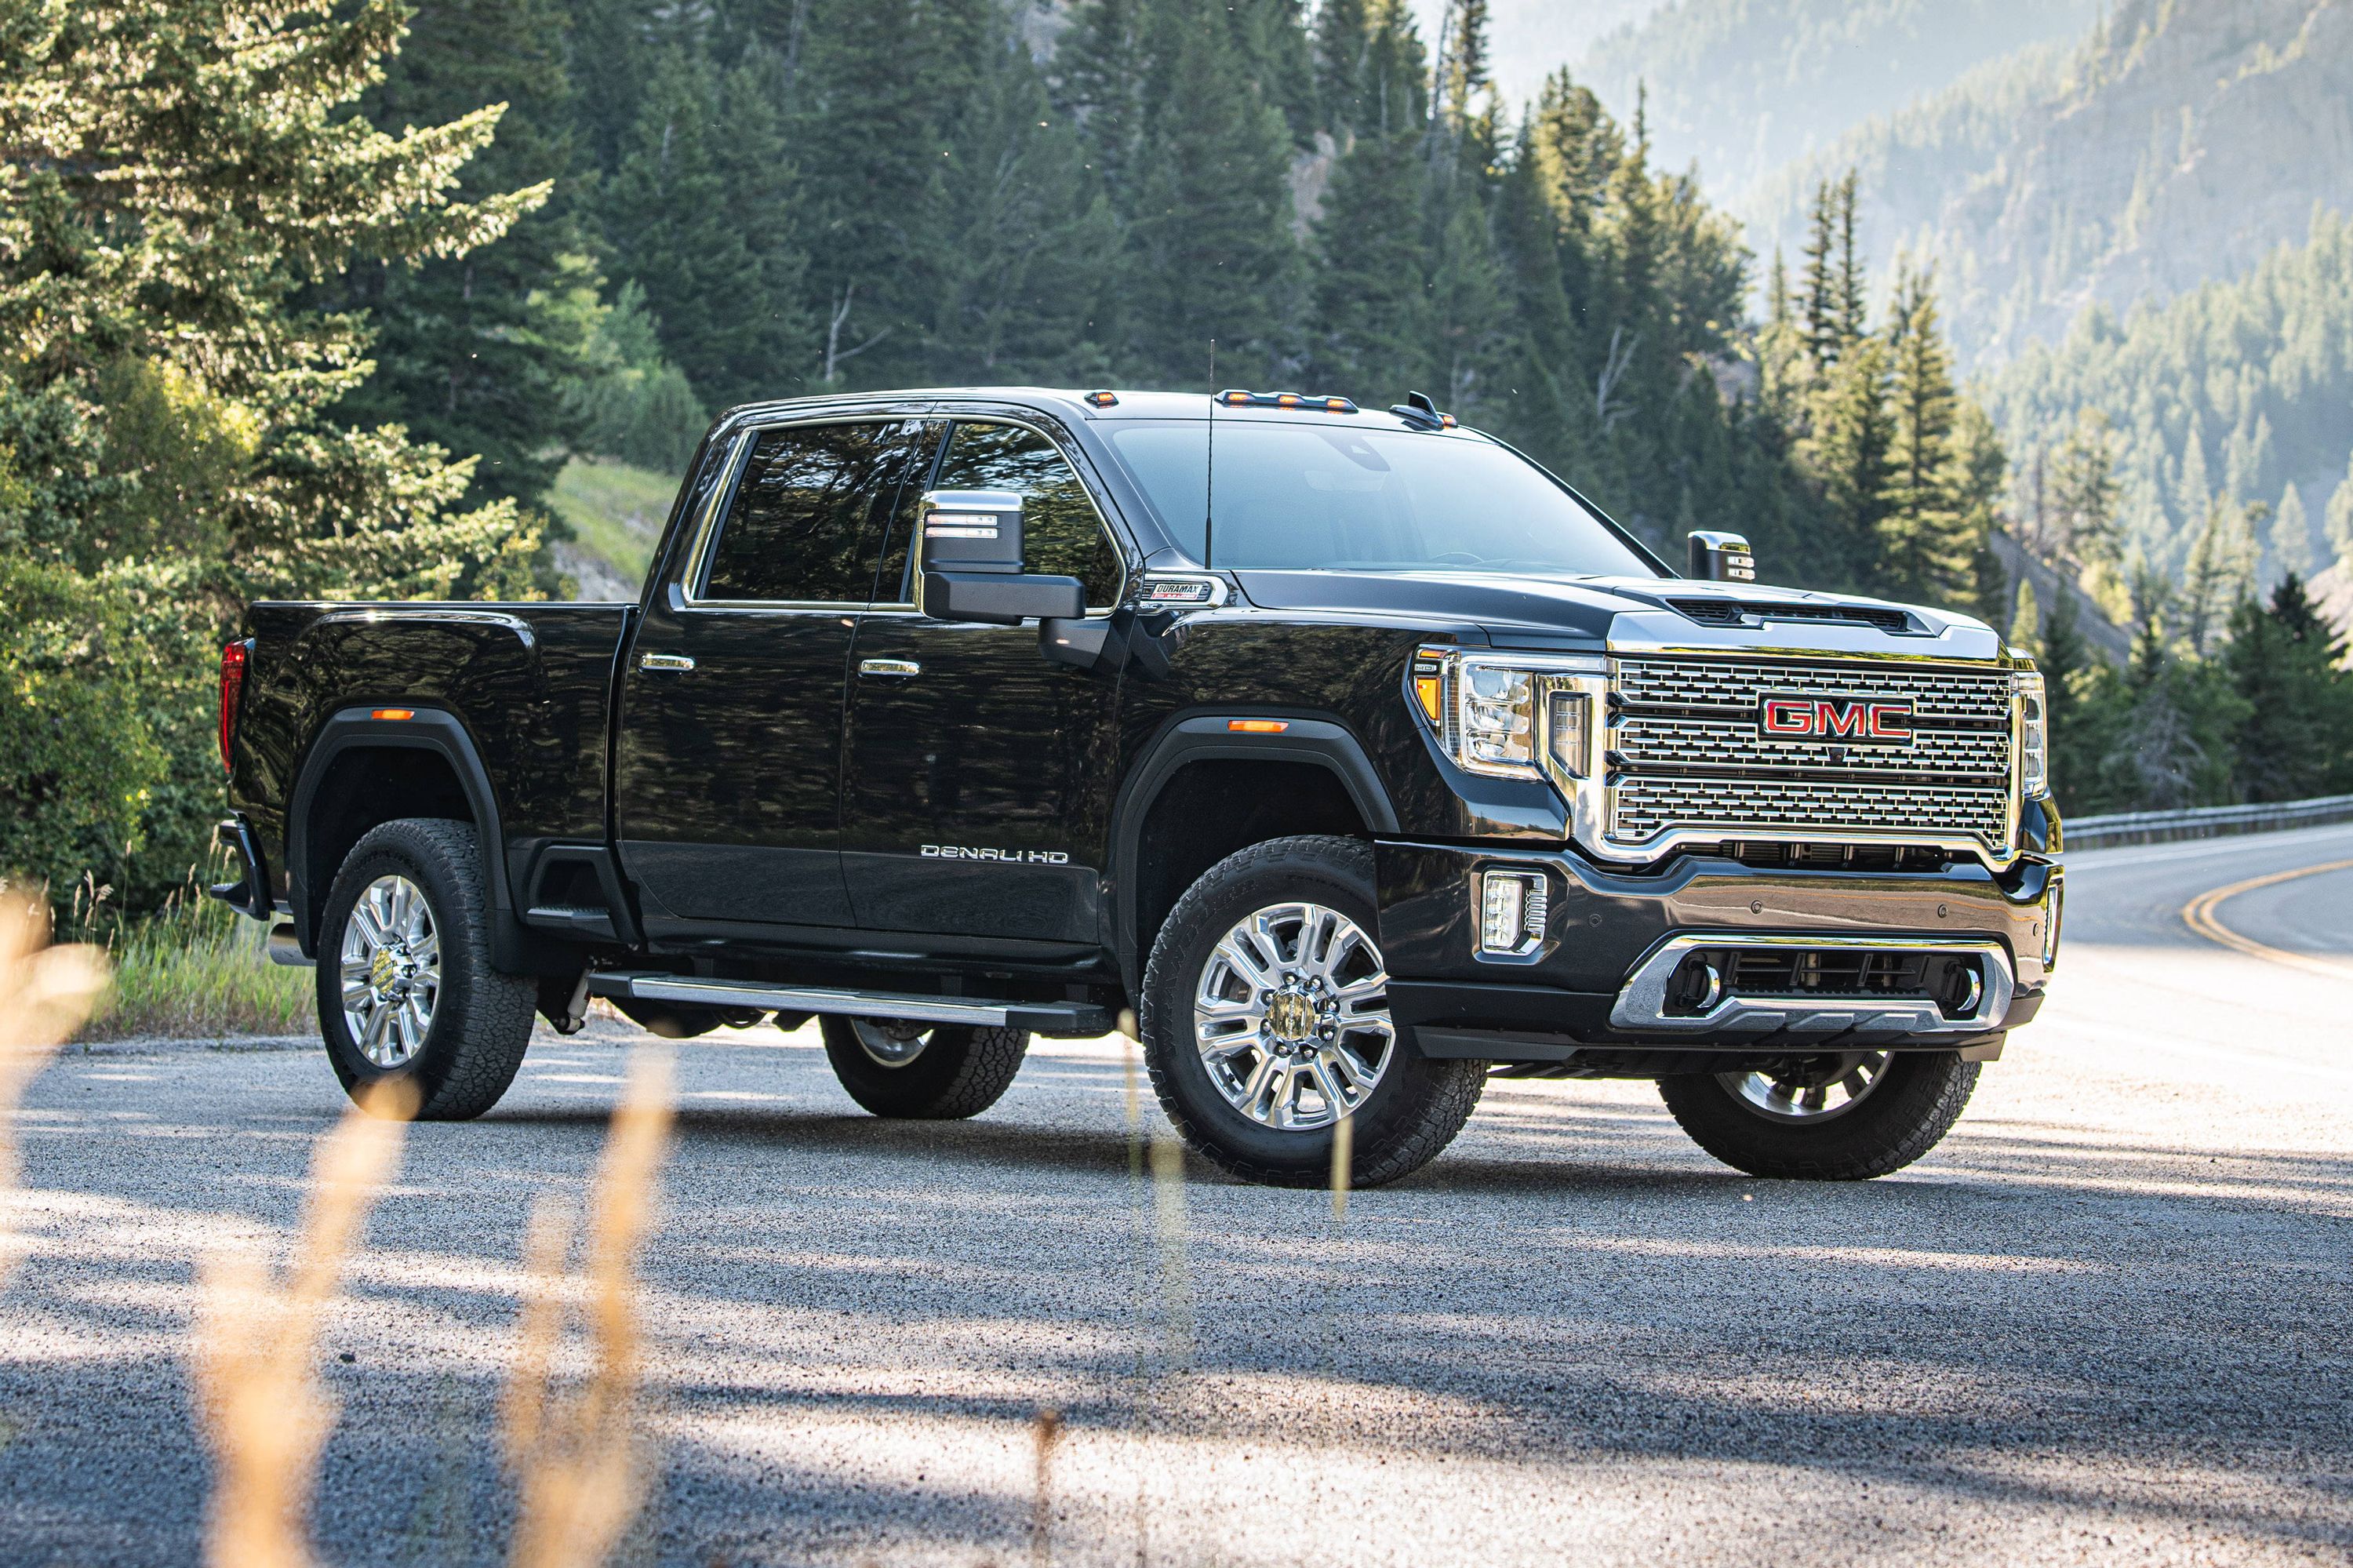 21 Gmc Sierra Hd Review Pricing And Specs